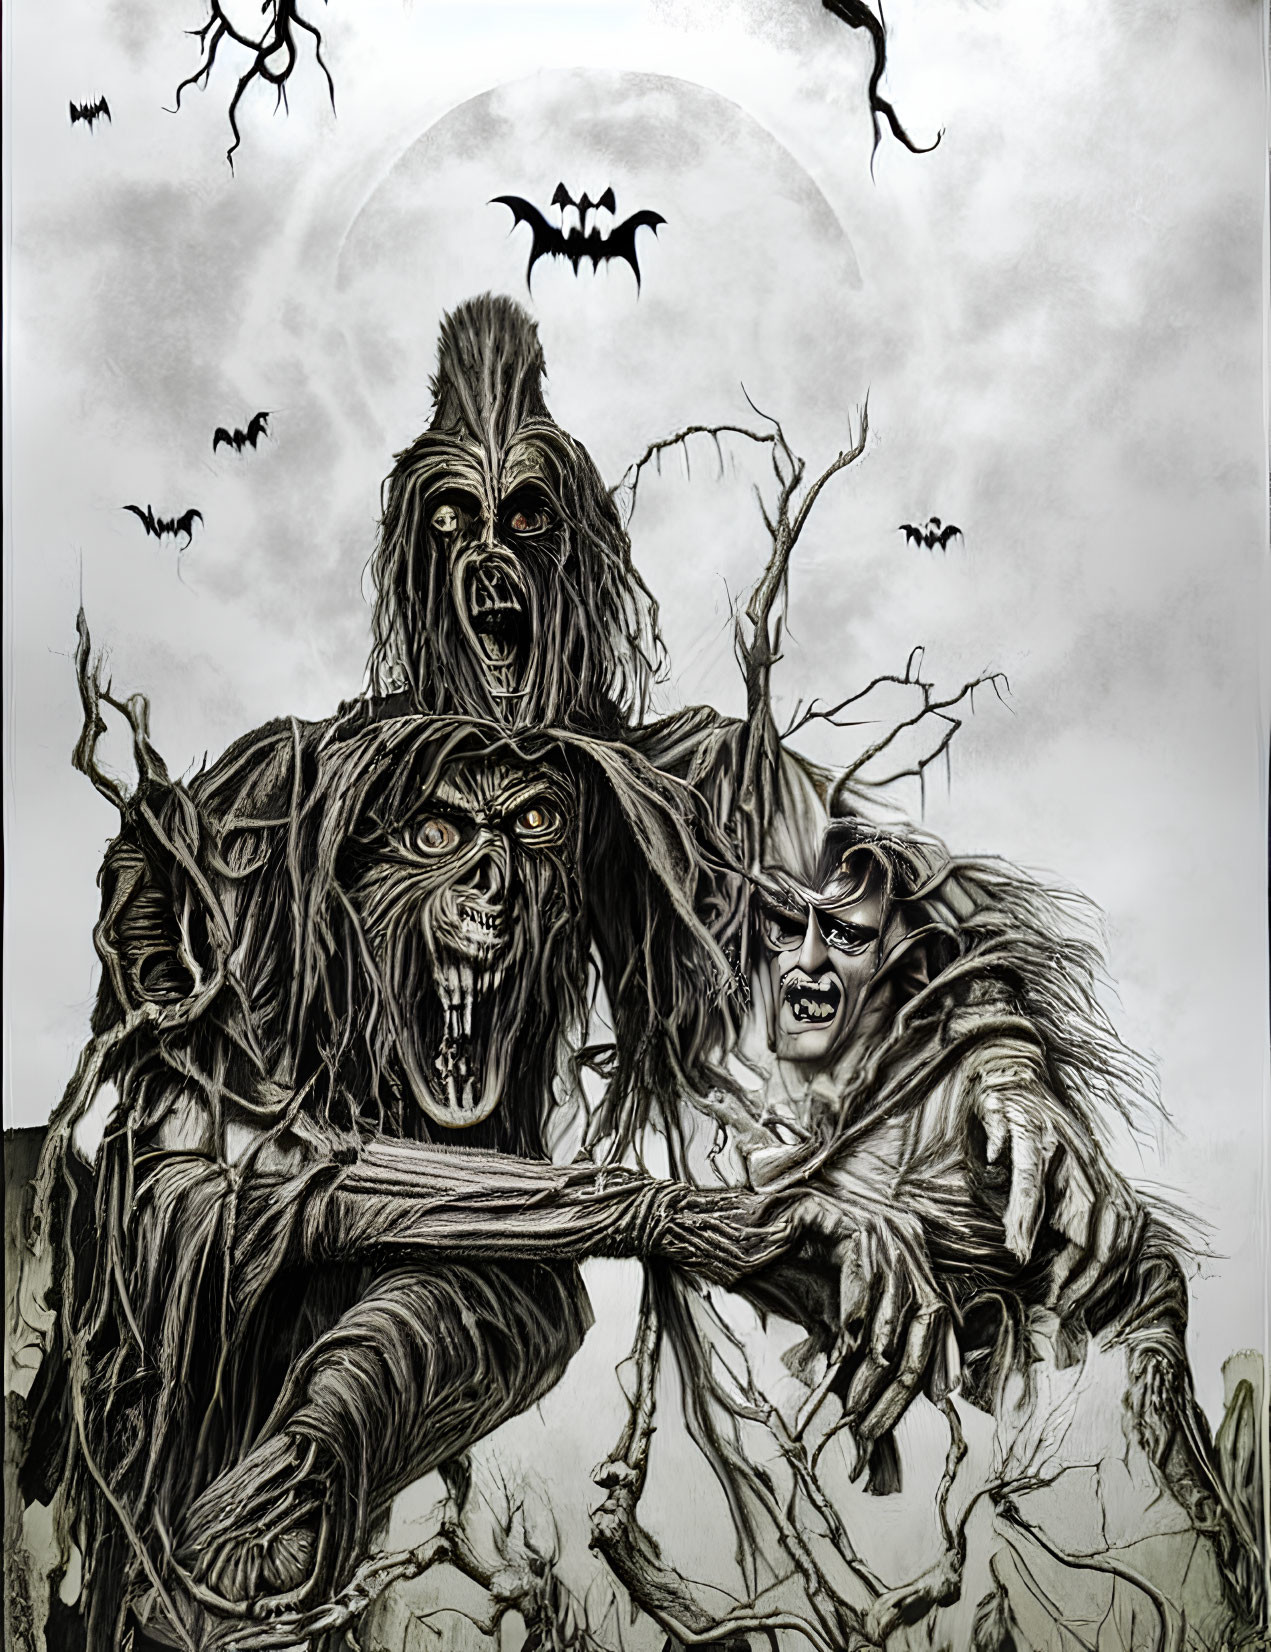 Illustration of three menacing witches under a full moon